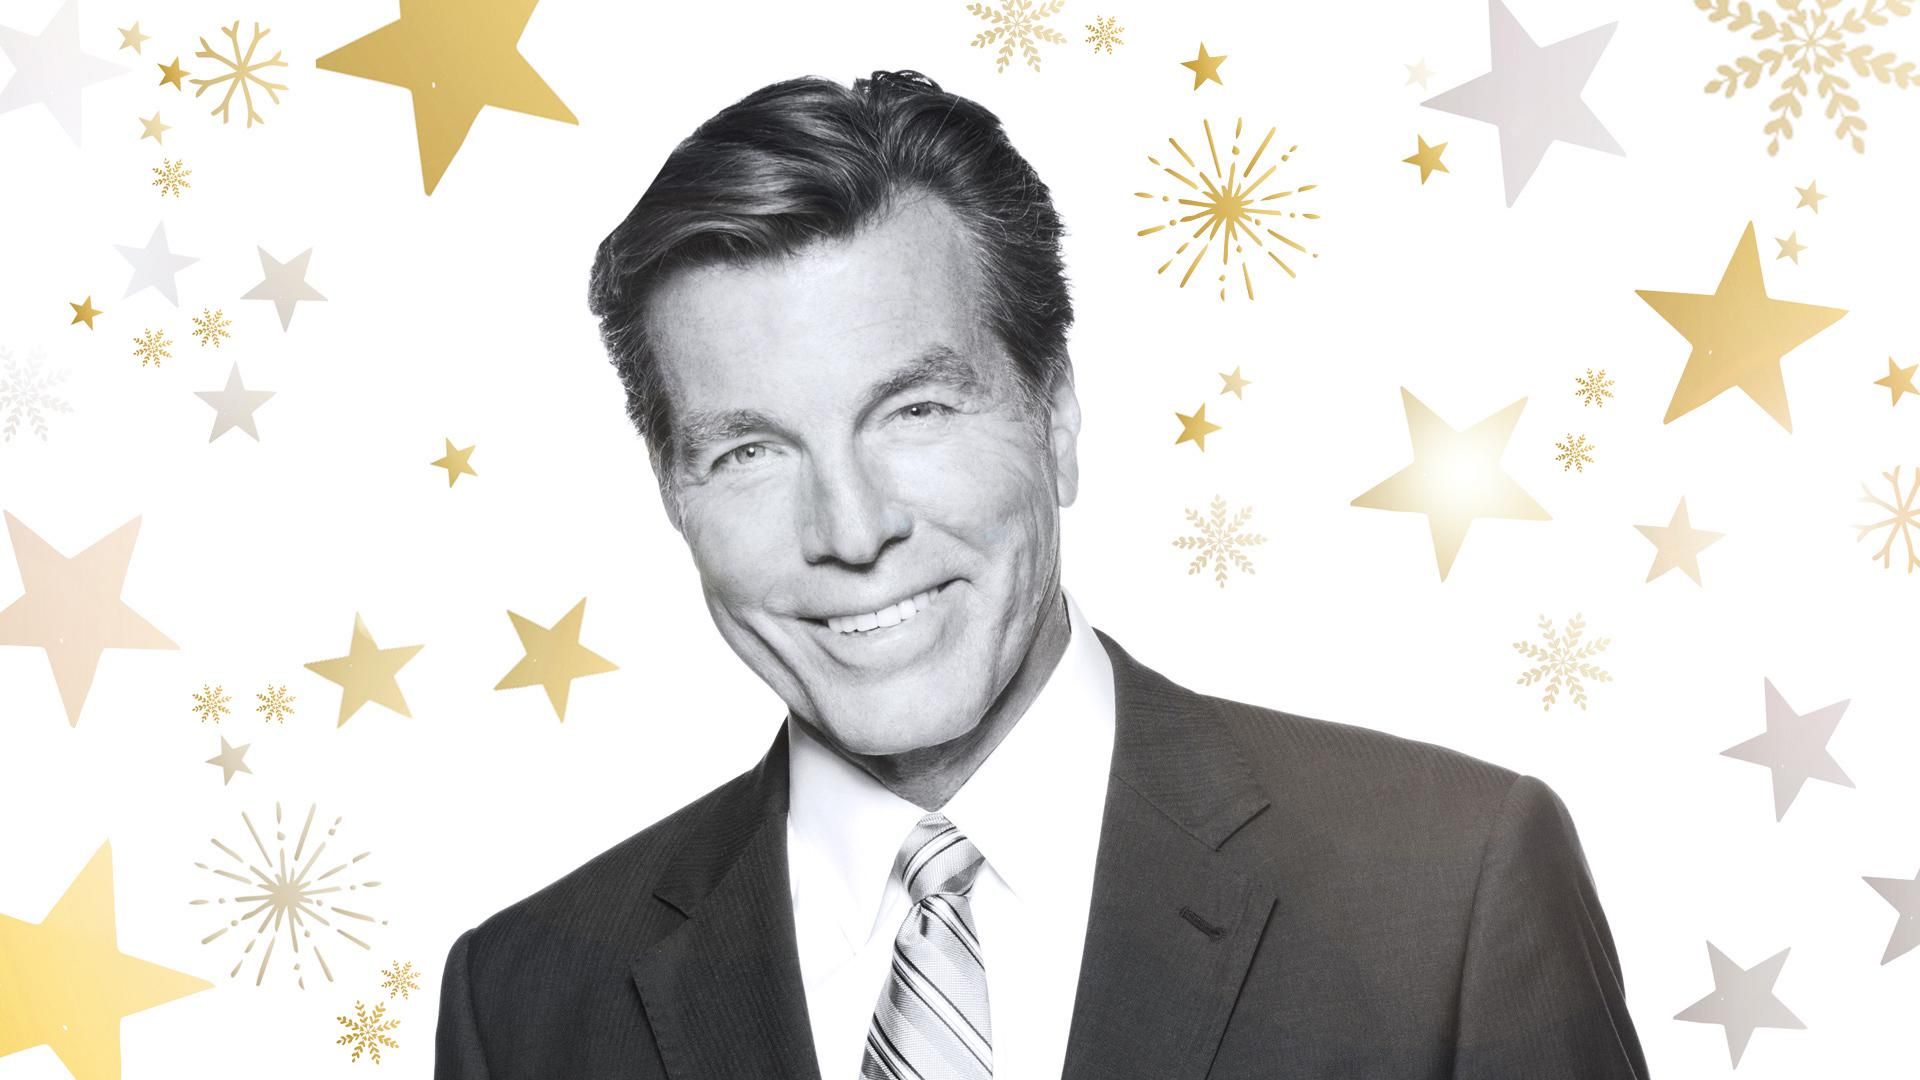 Peter Bergman poses for a holiday image.